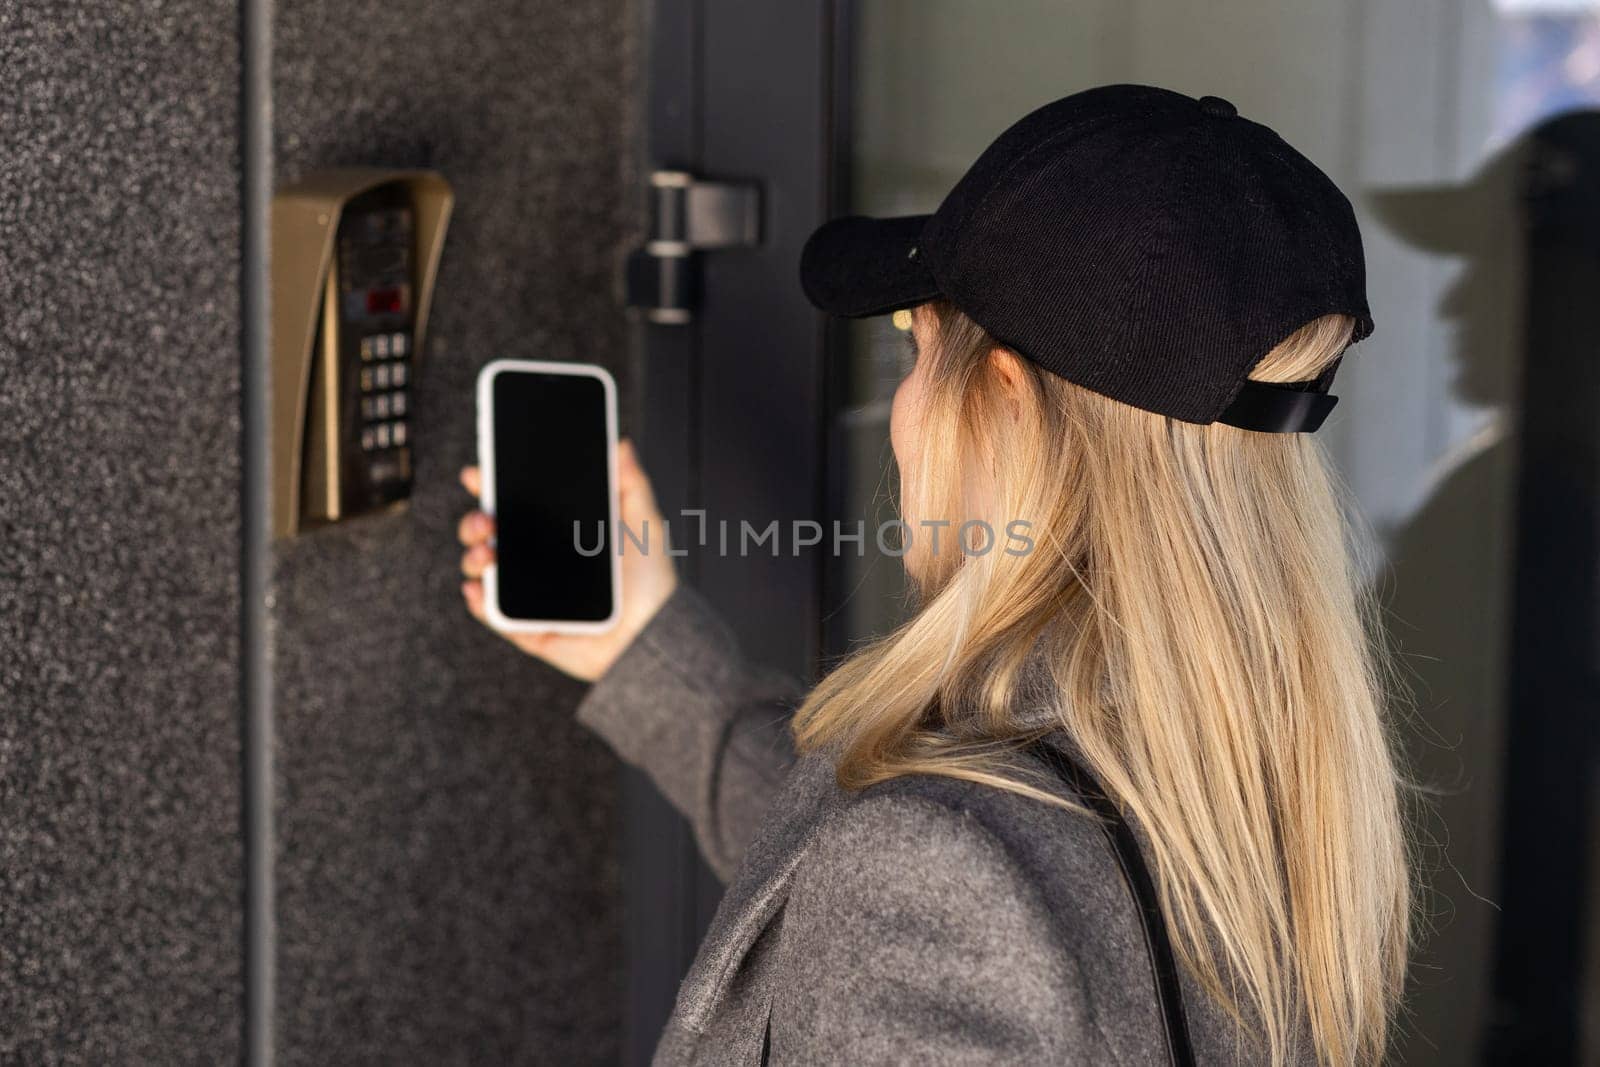 Woman locking smartlock on the entrance door using a smart phone. Concept of using smart electronic locks with keyless access. High quality photo